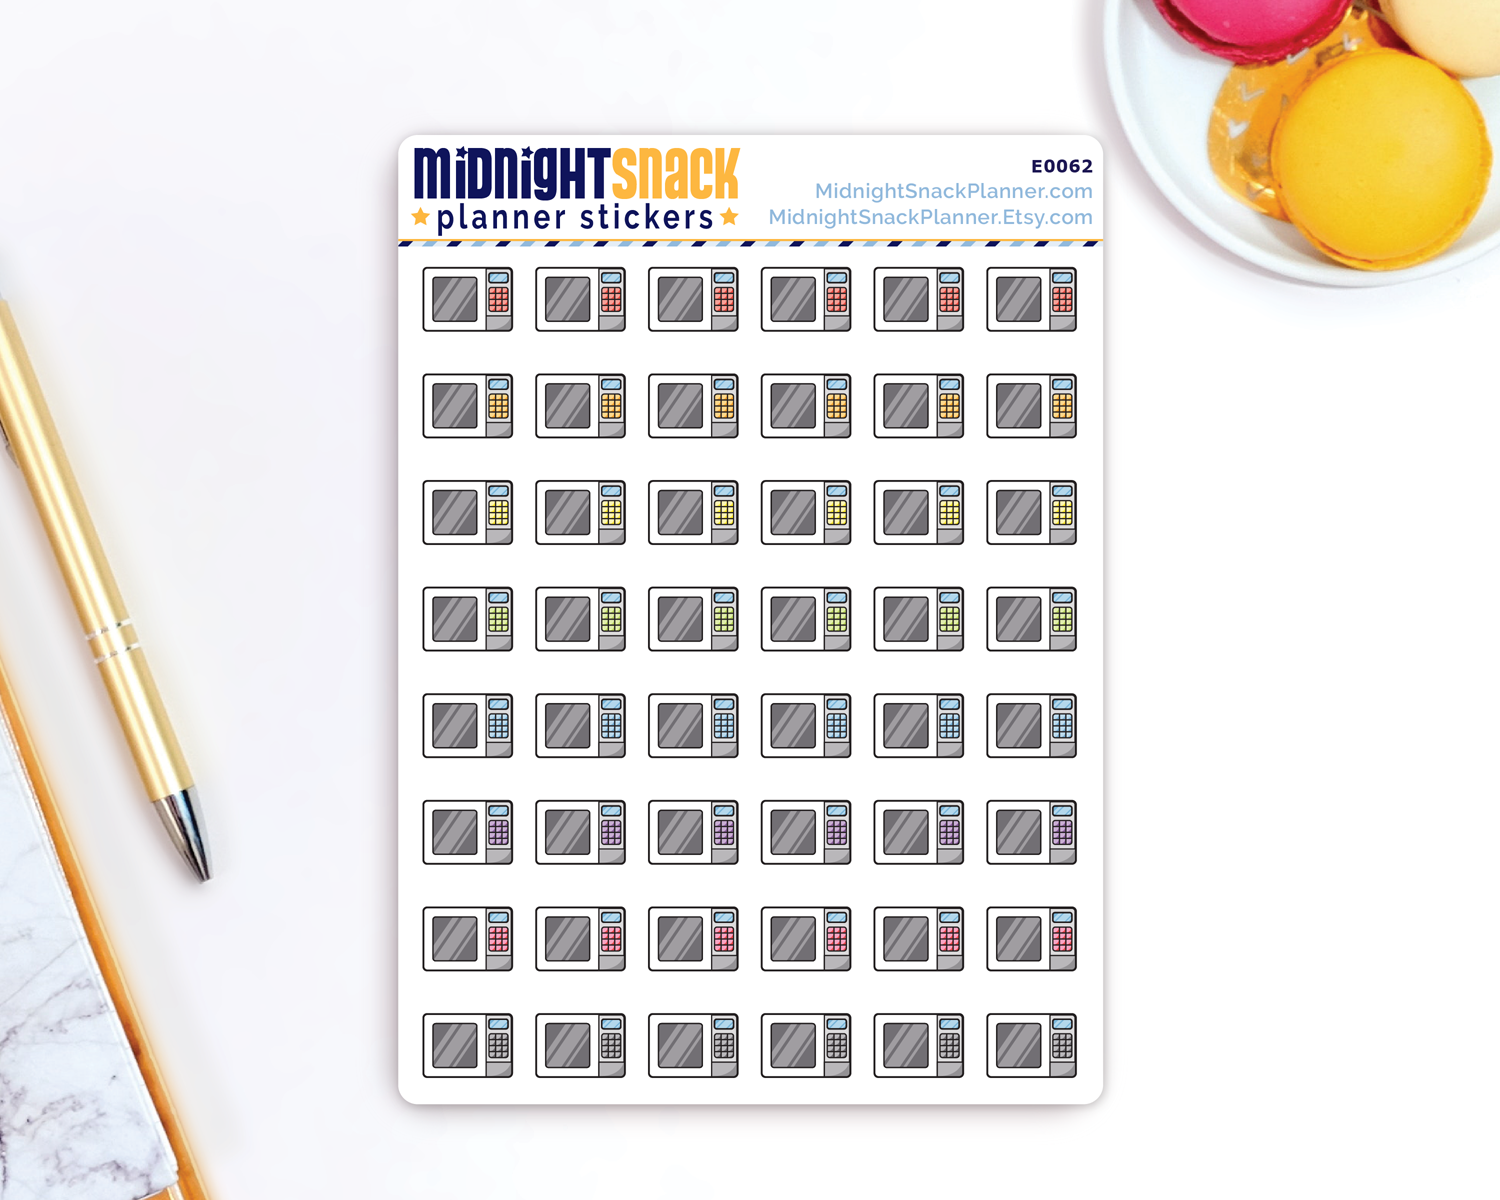 Microwave Icon: Small Appliance Planner Stickers